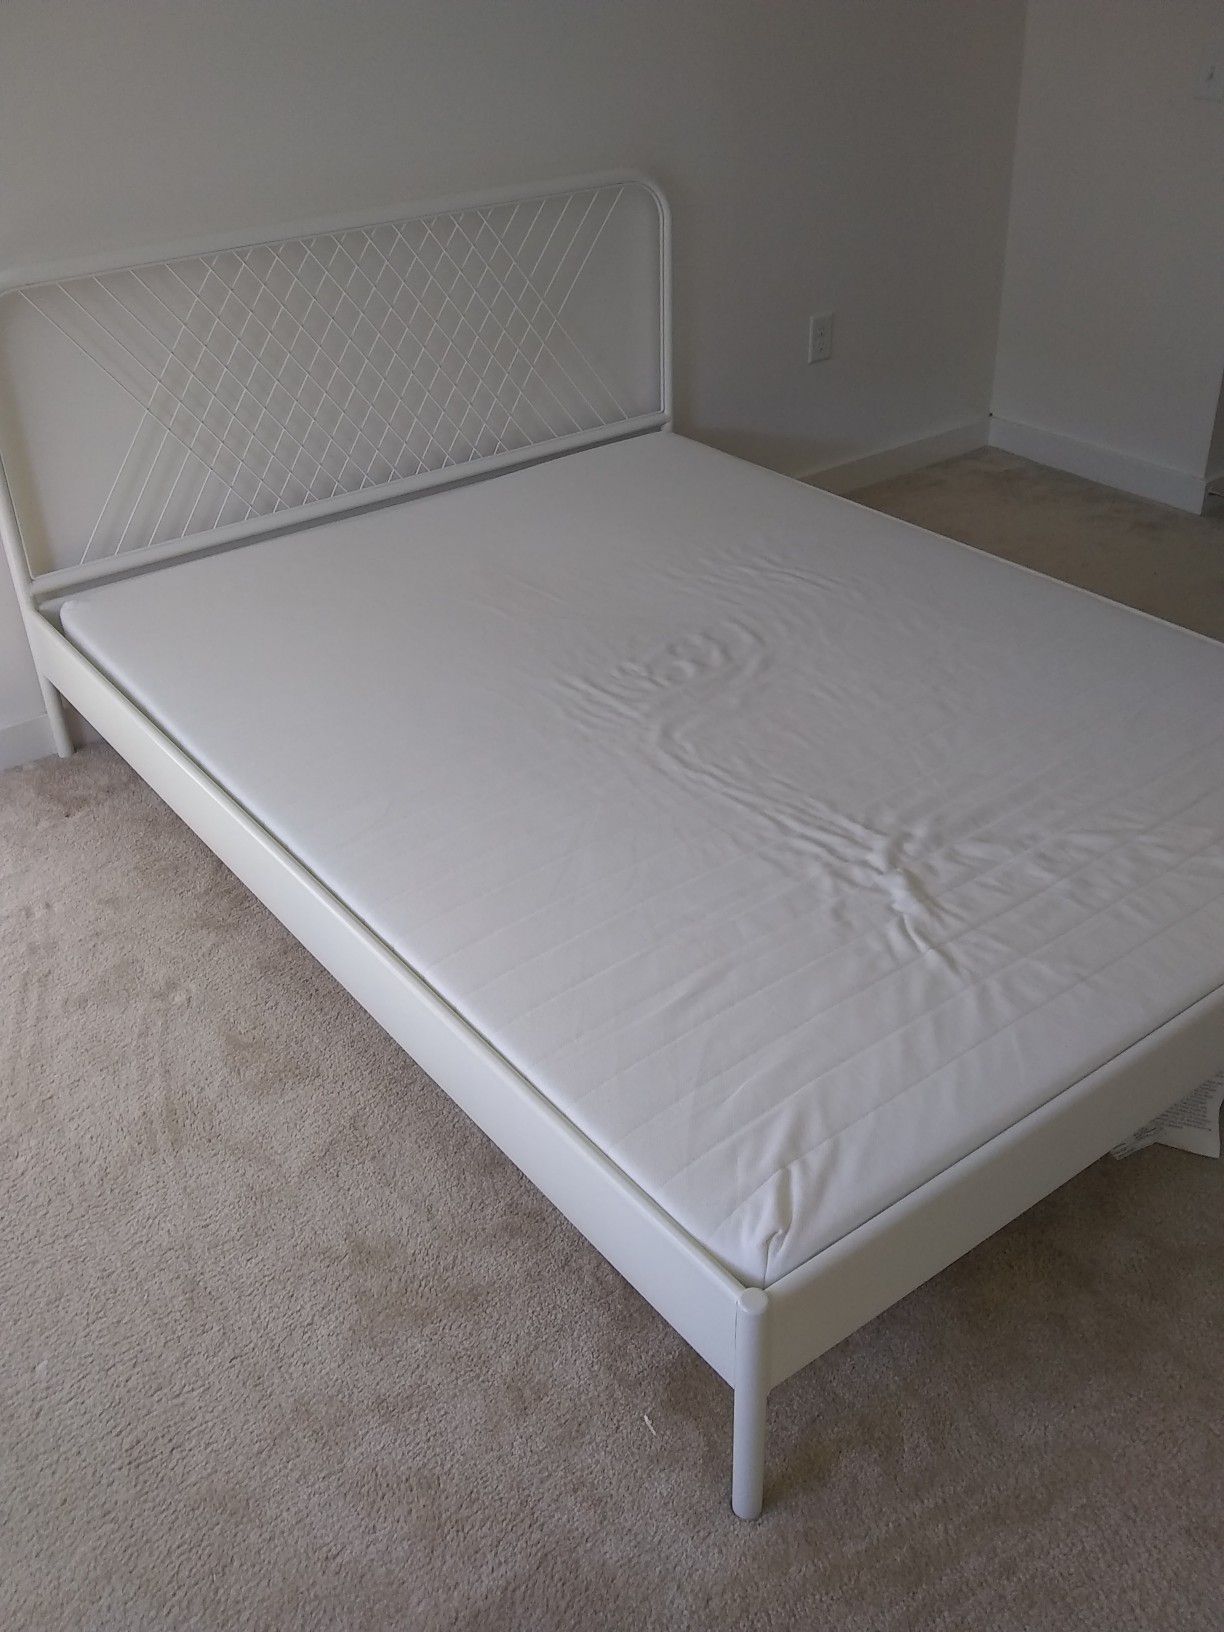 Solid metal full size bed